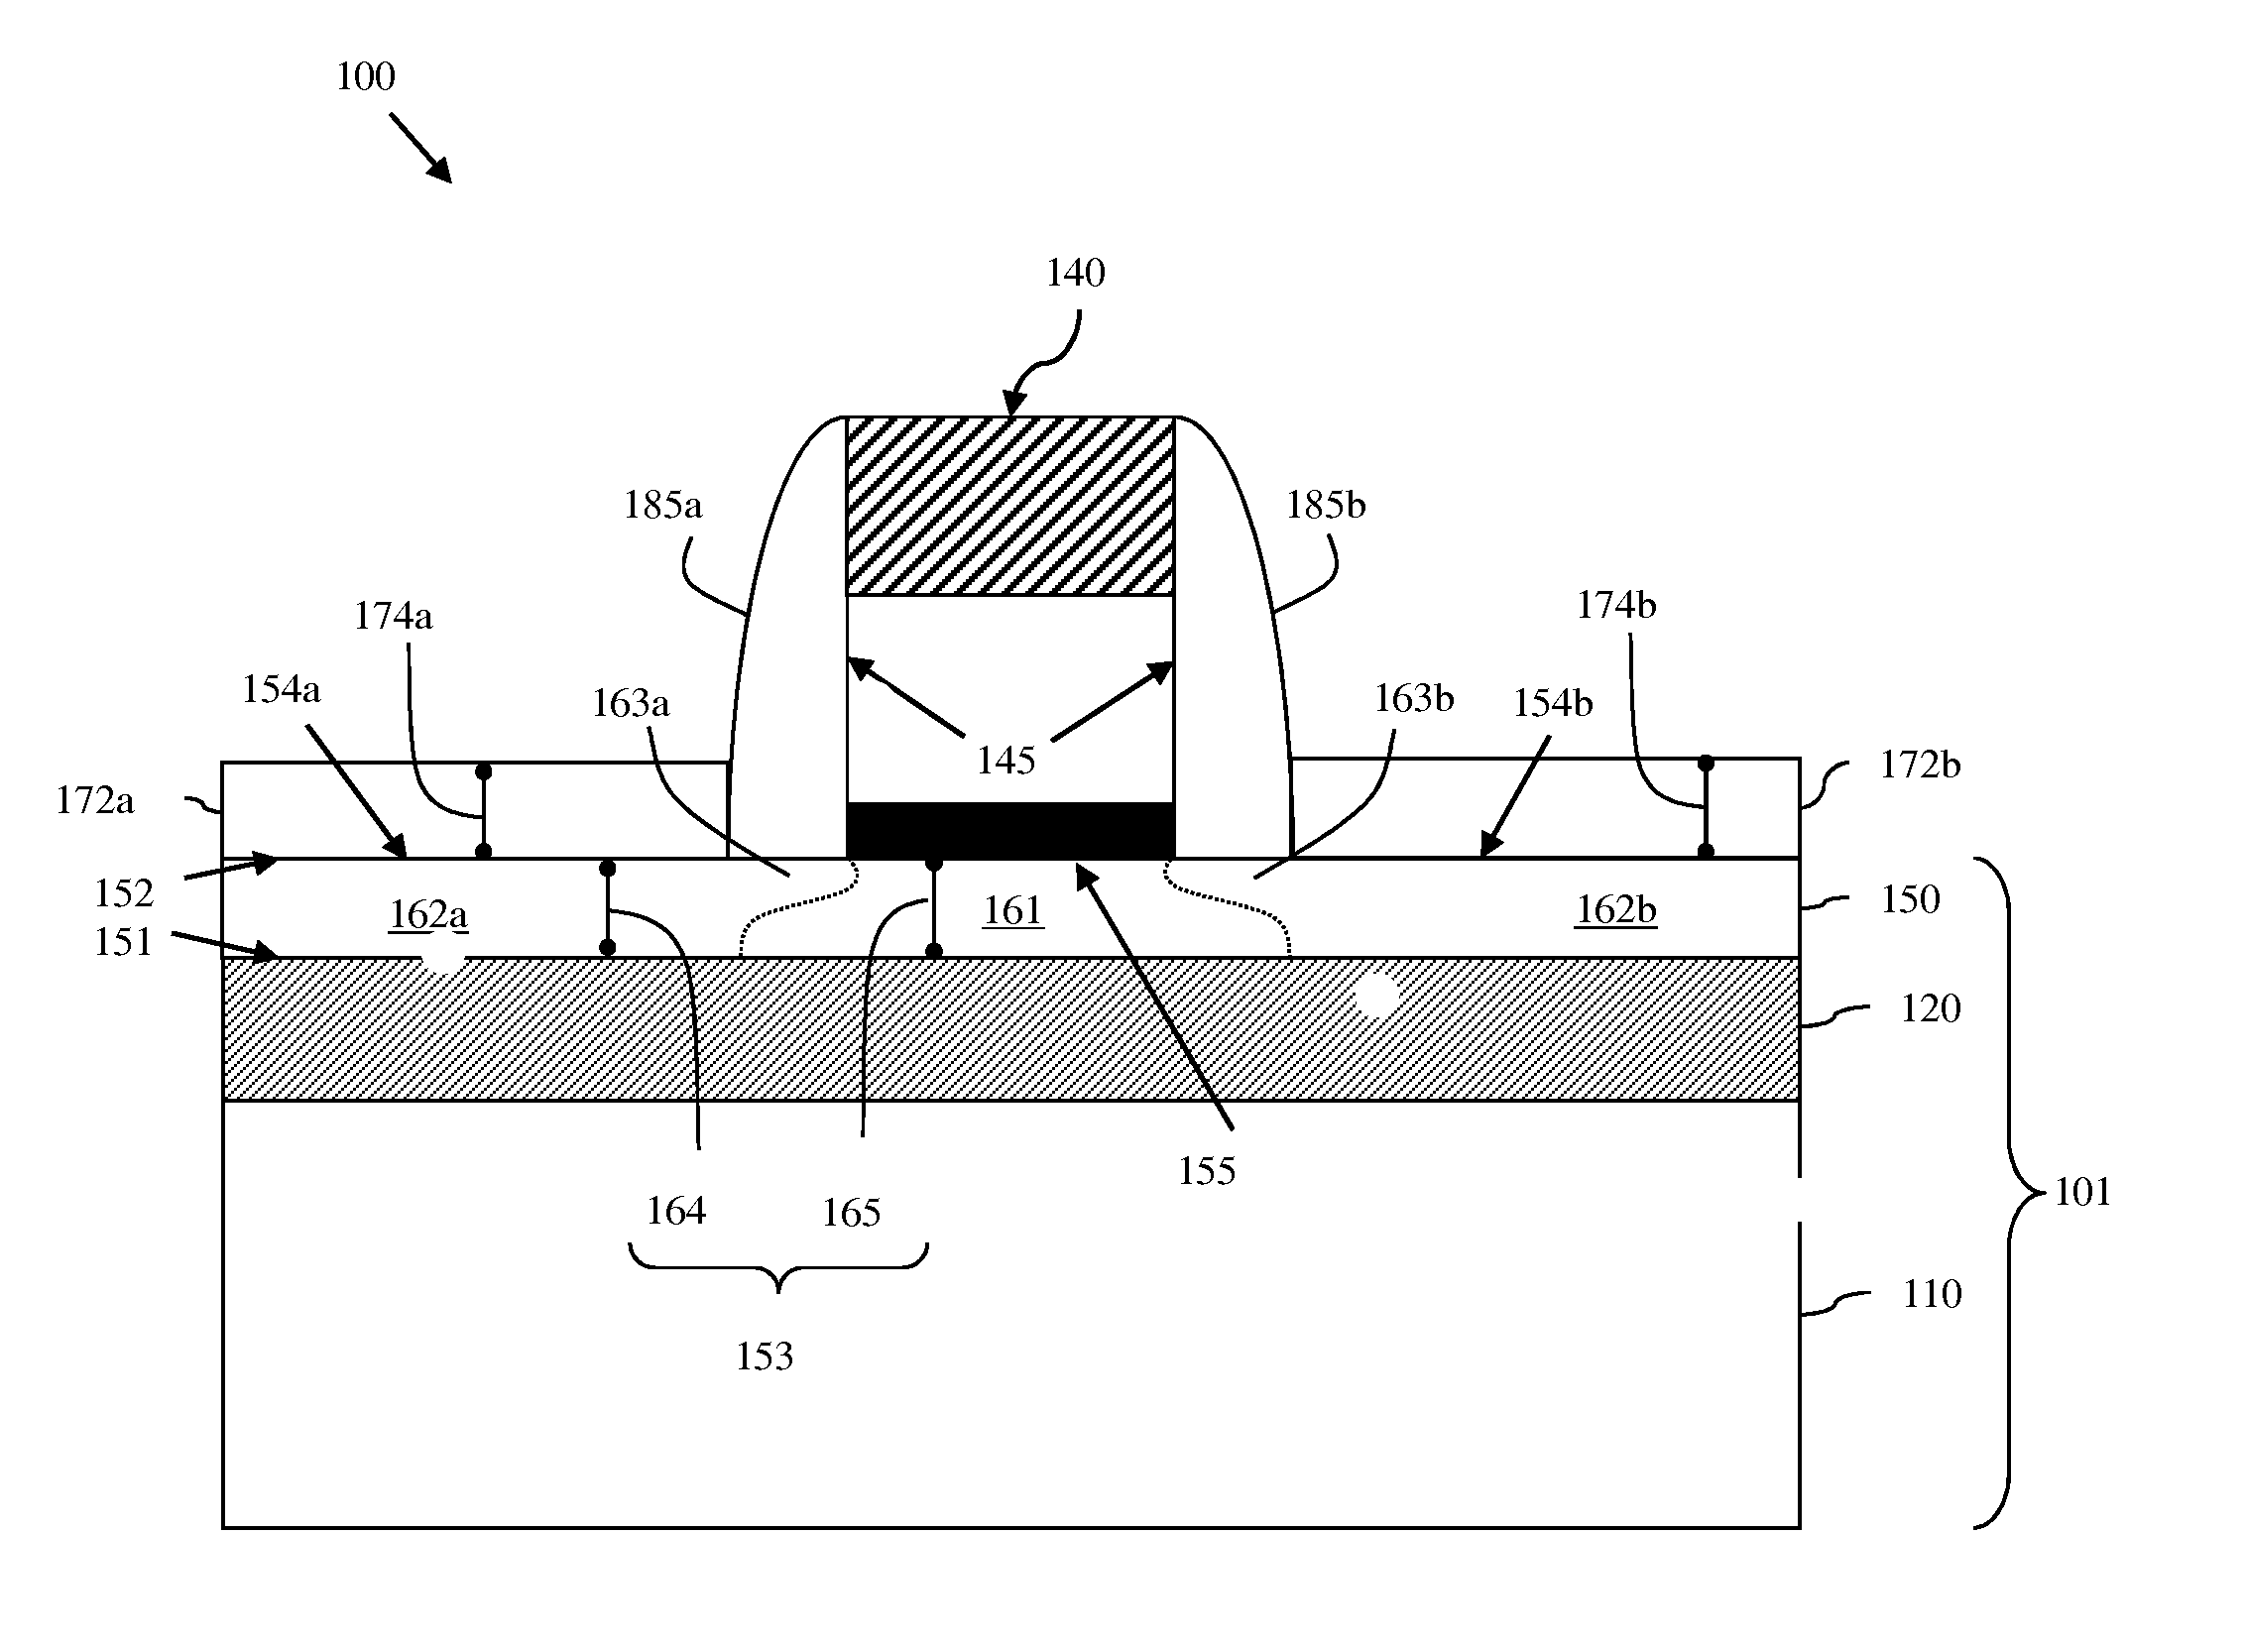 Field effect transistor (FET) and method of forming the fet without damaging the wafer surface